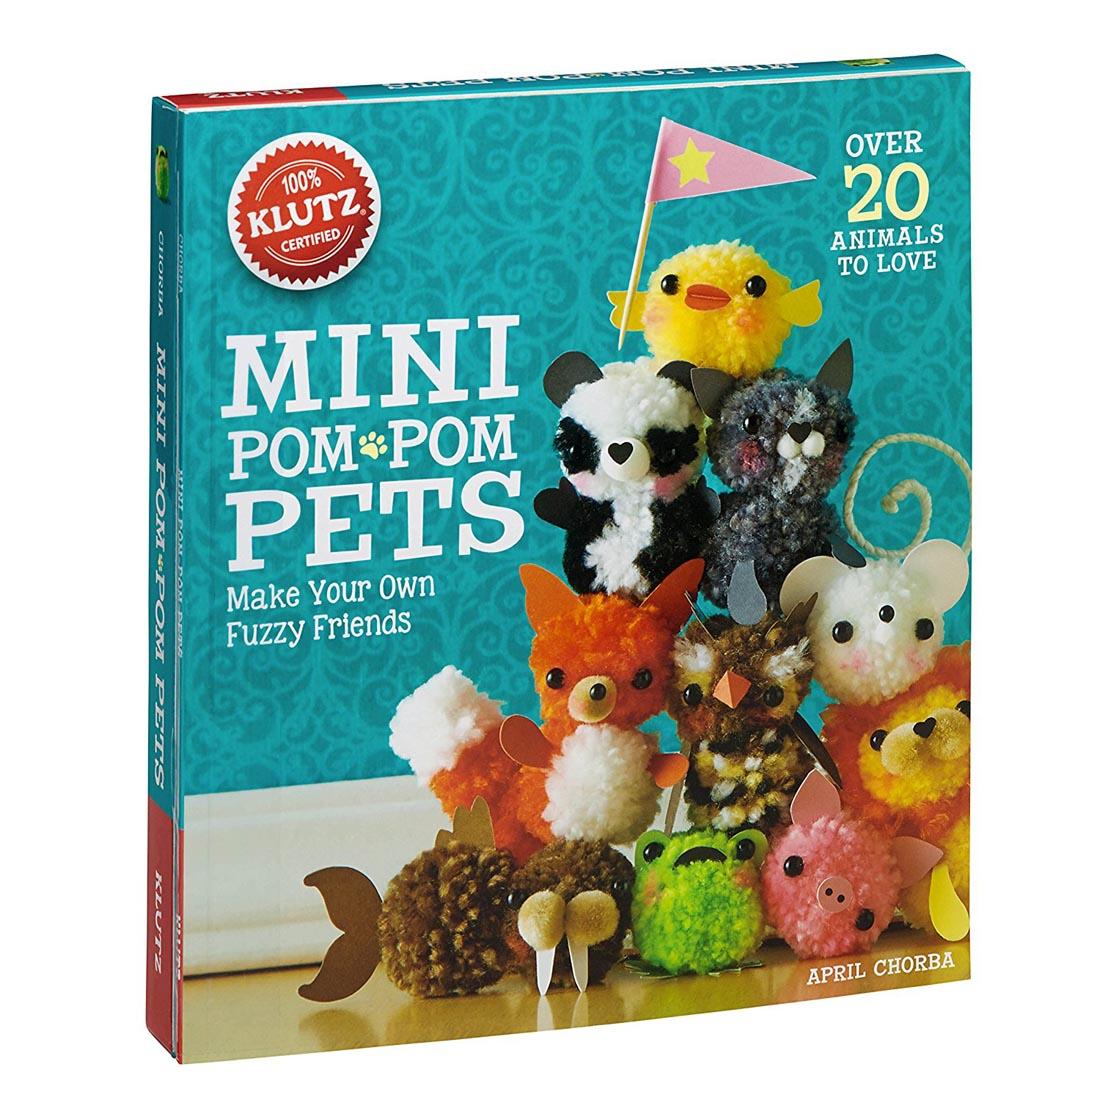 mini pom pom pets box shows completed projects of a chick, panda, fox, owl, lion and more